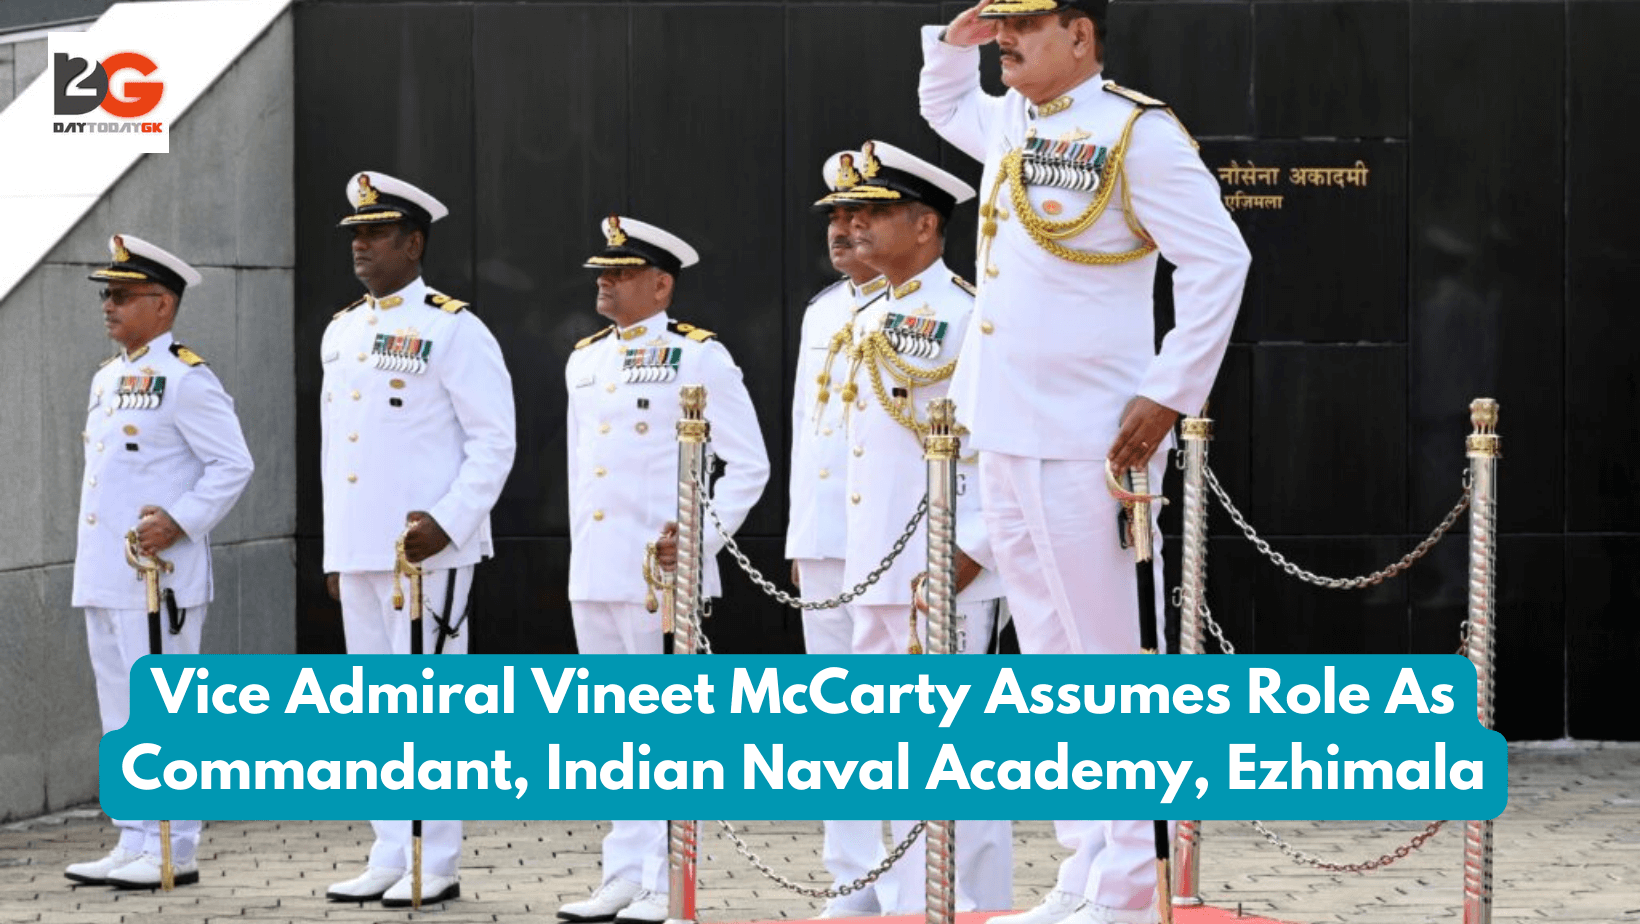 Vice Admiral Vineet McCarty Assumes Role As Commandant, Indian Naval Academy, Ezhimala